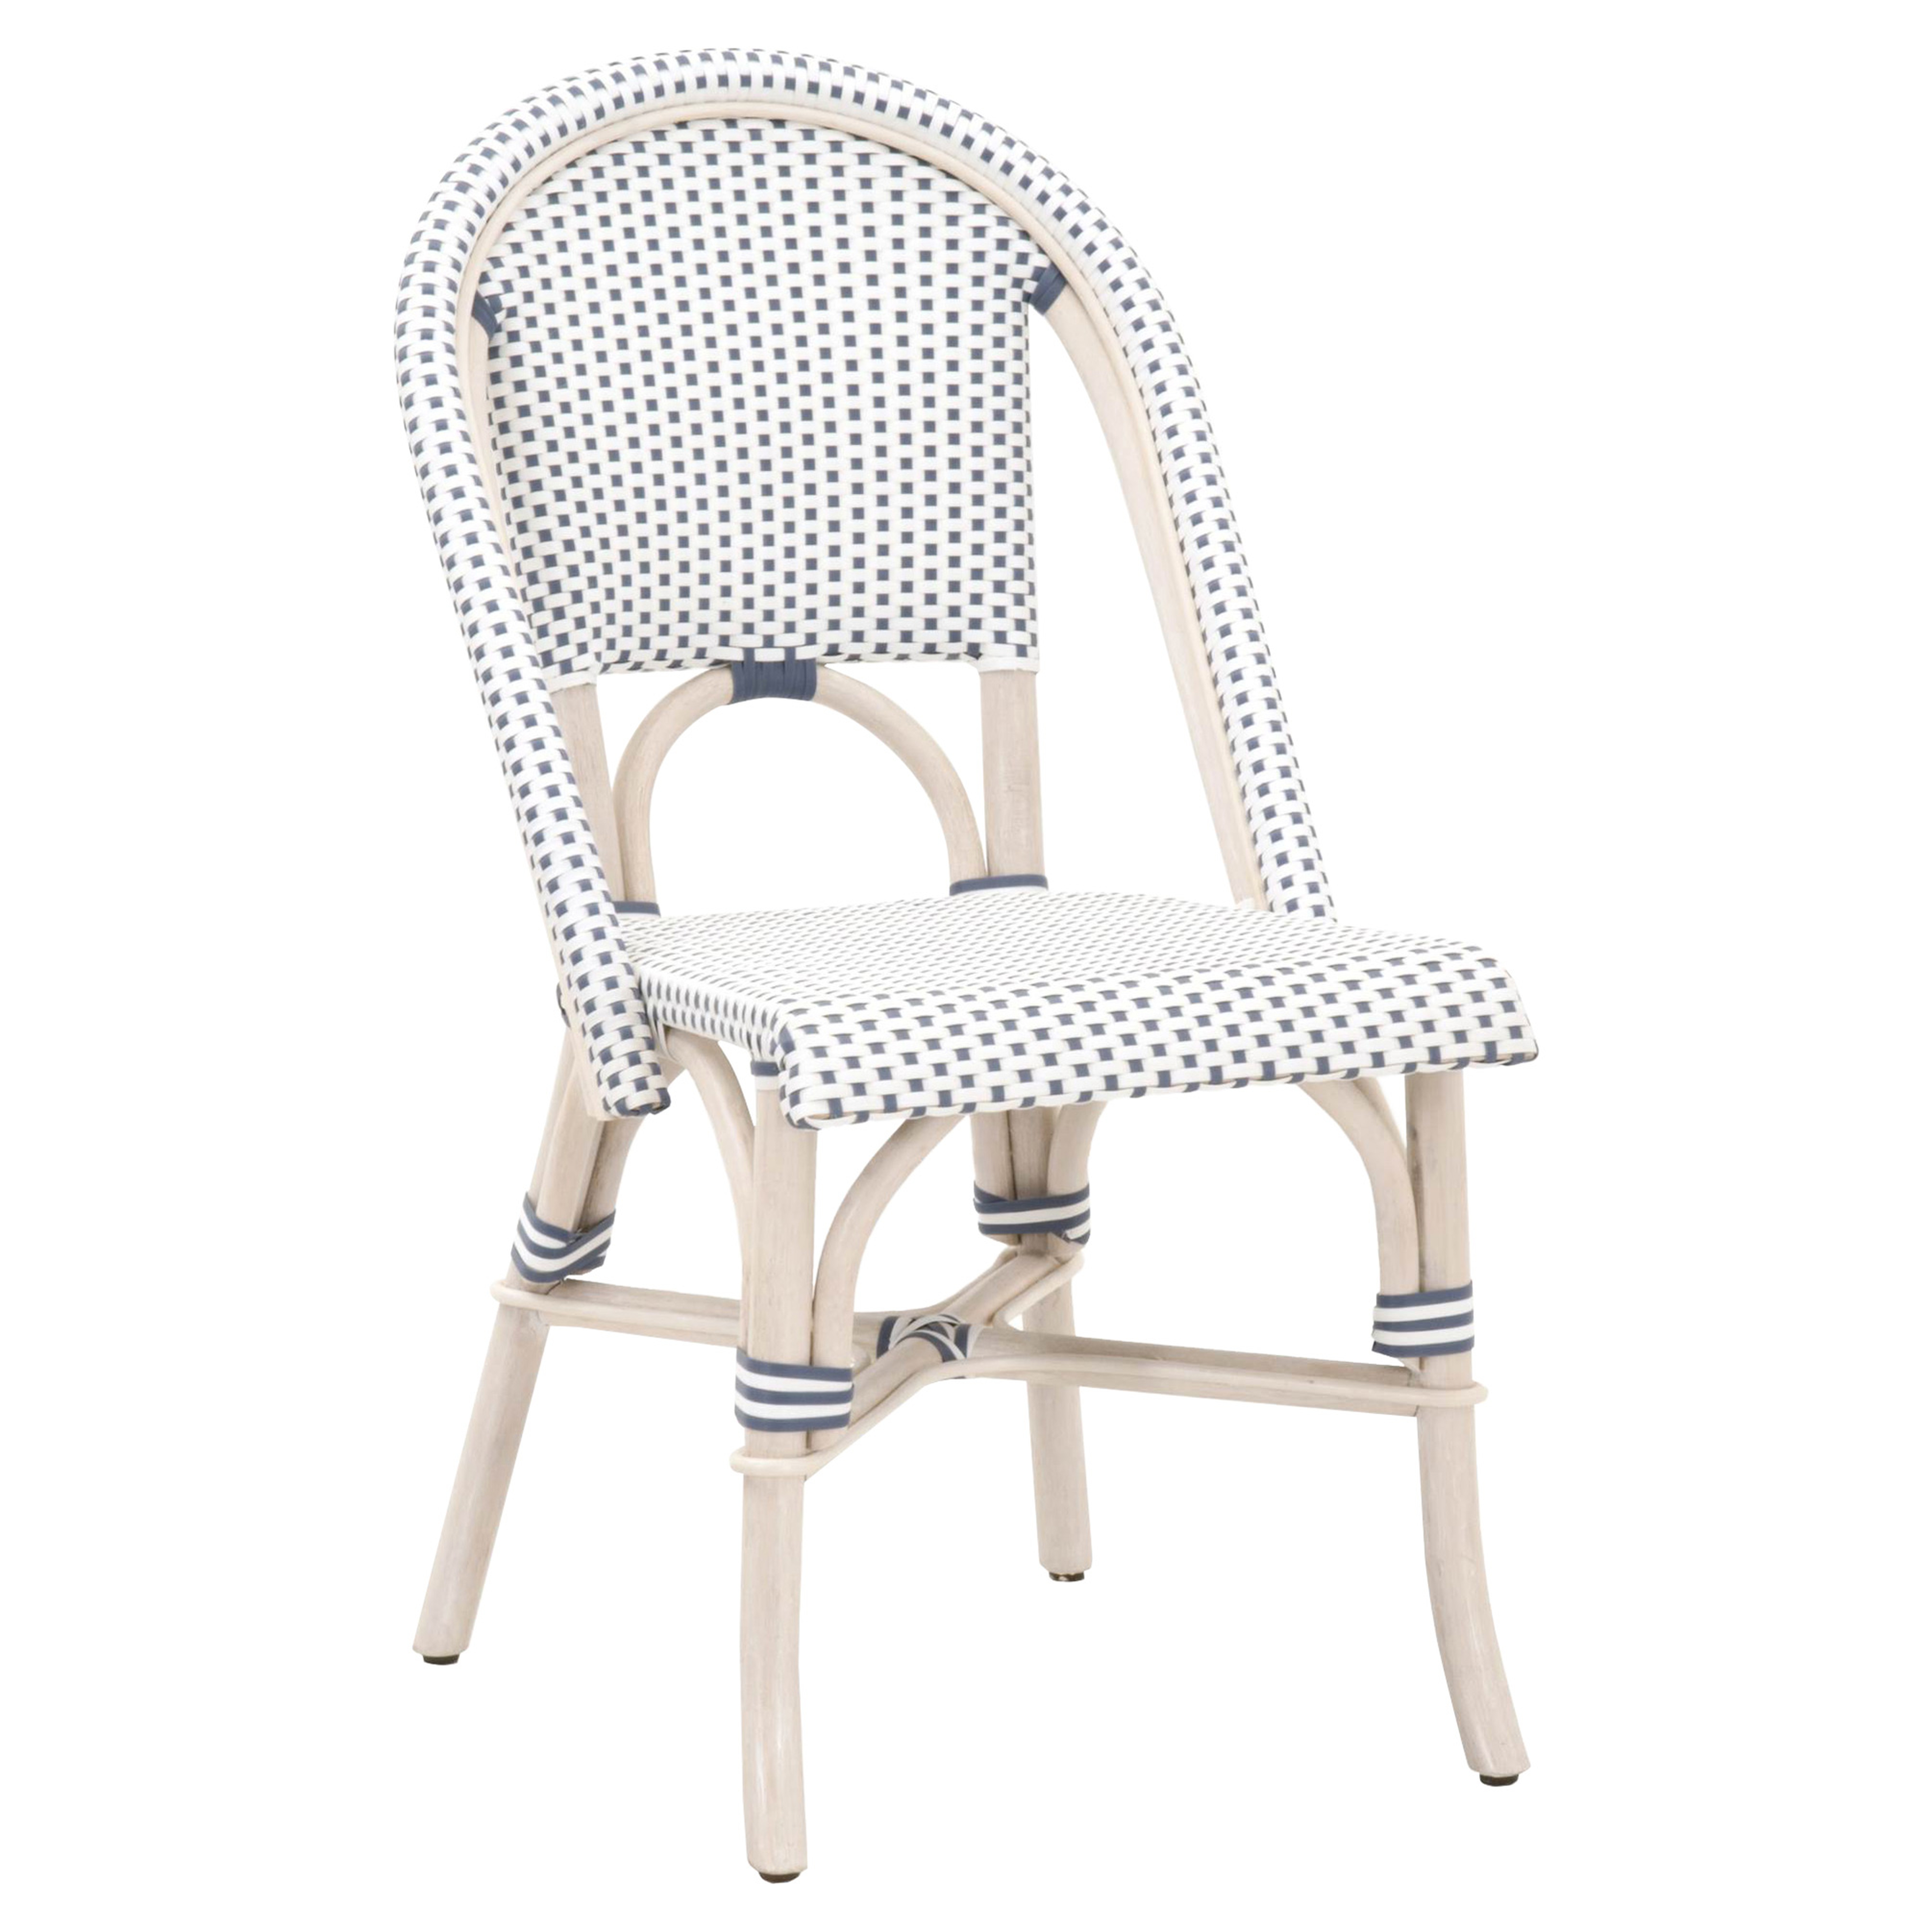 Peter Global Bazaar Woven White Wash Rattan Outdoor Dining Side Chair - Set of 2 - Kathy Kuo Home